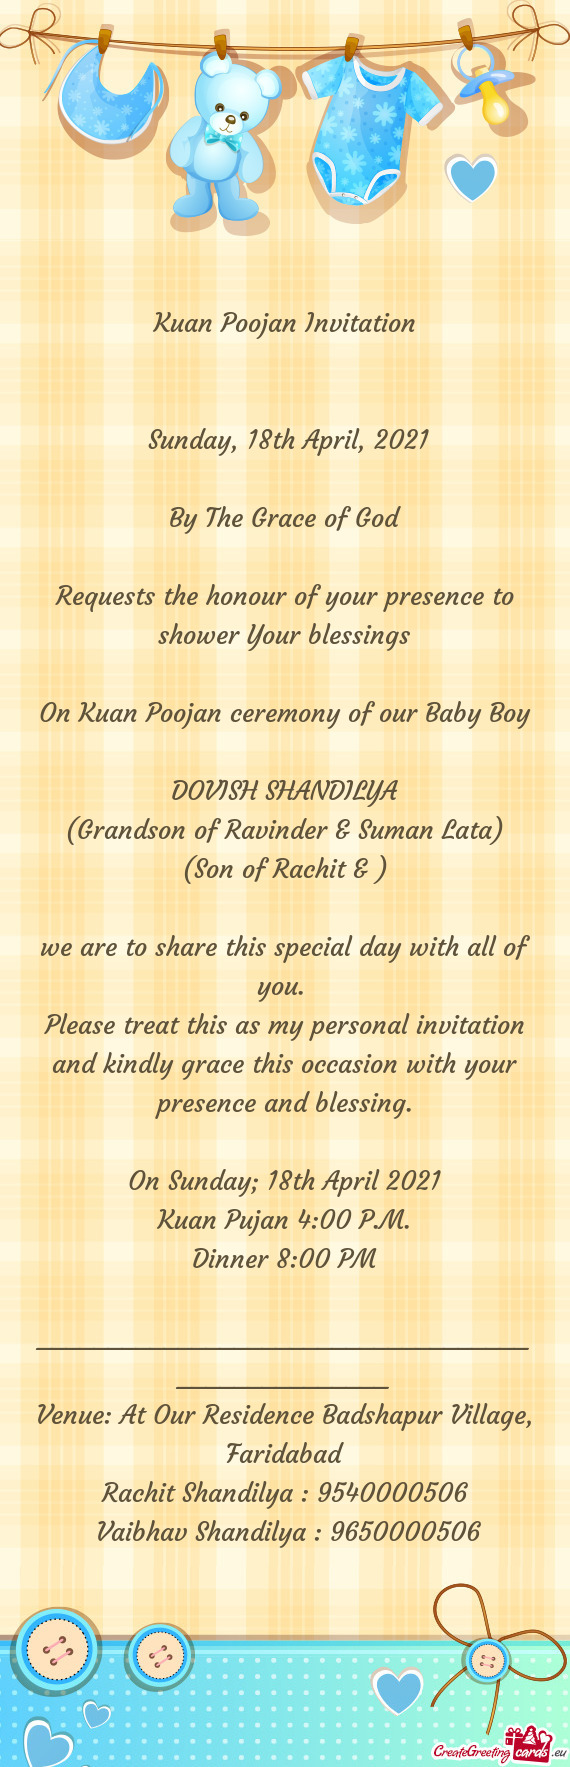 On Kuan Poojan ceremony of our Baby Boy